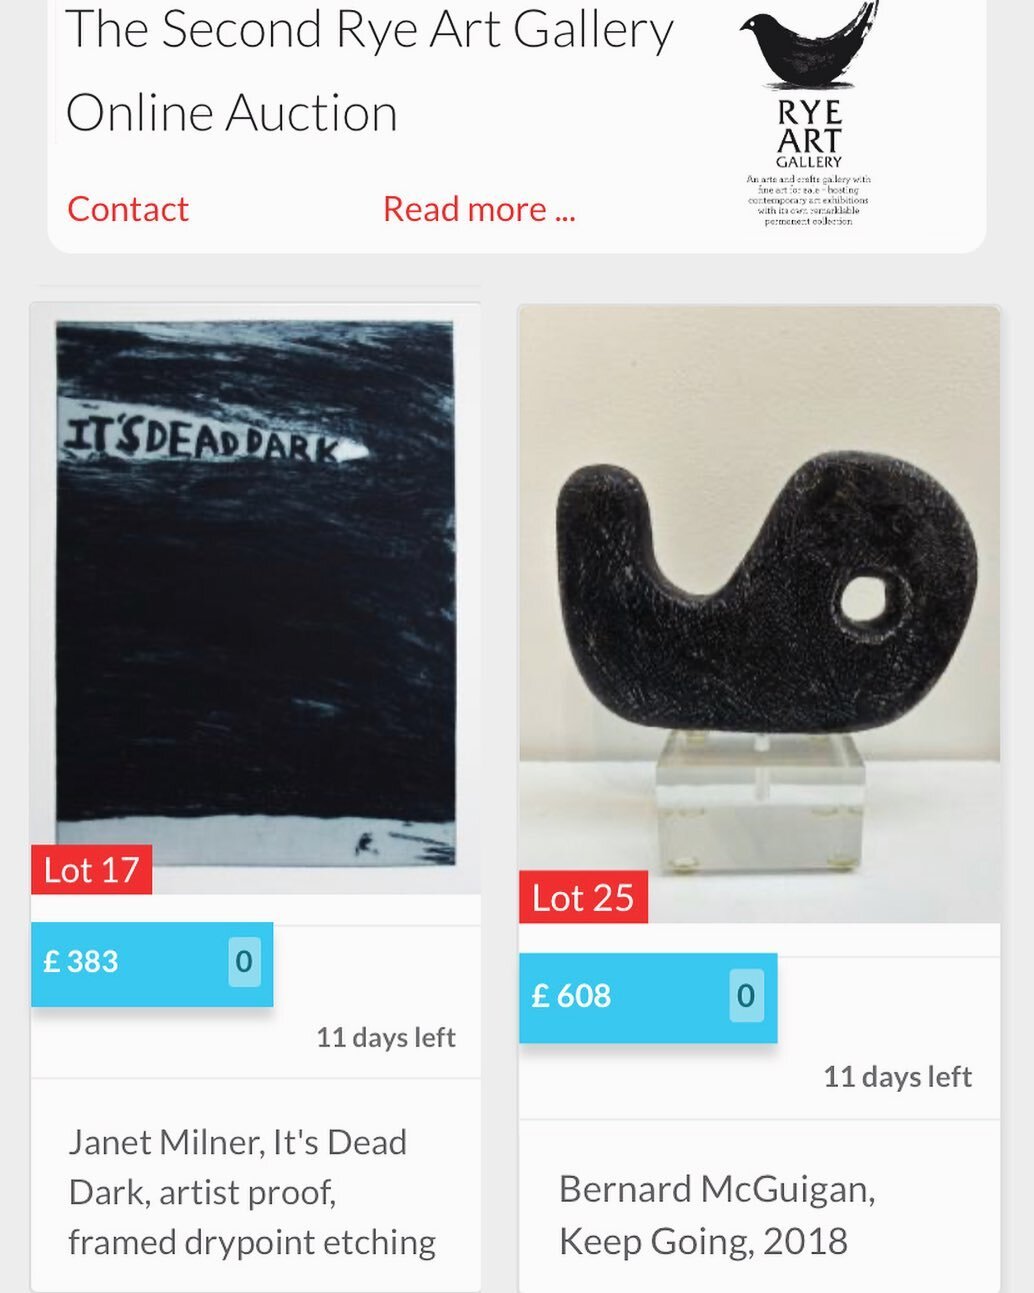 Rye Art Gallery online auction features over 50 selected works. All profits raised from this auction sale will go to the Rye Art Gallery restoration fund. Many of the RAG Artists have donated pieces to the auction. The auction is now live and will ru